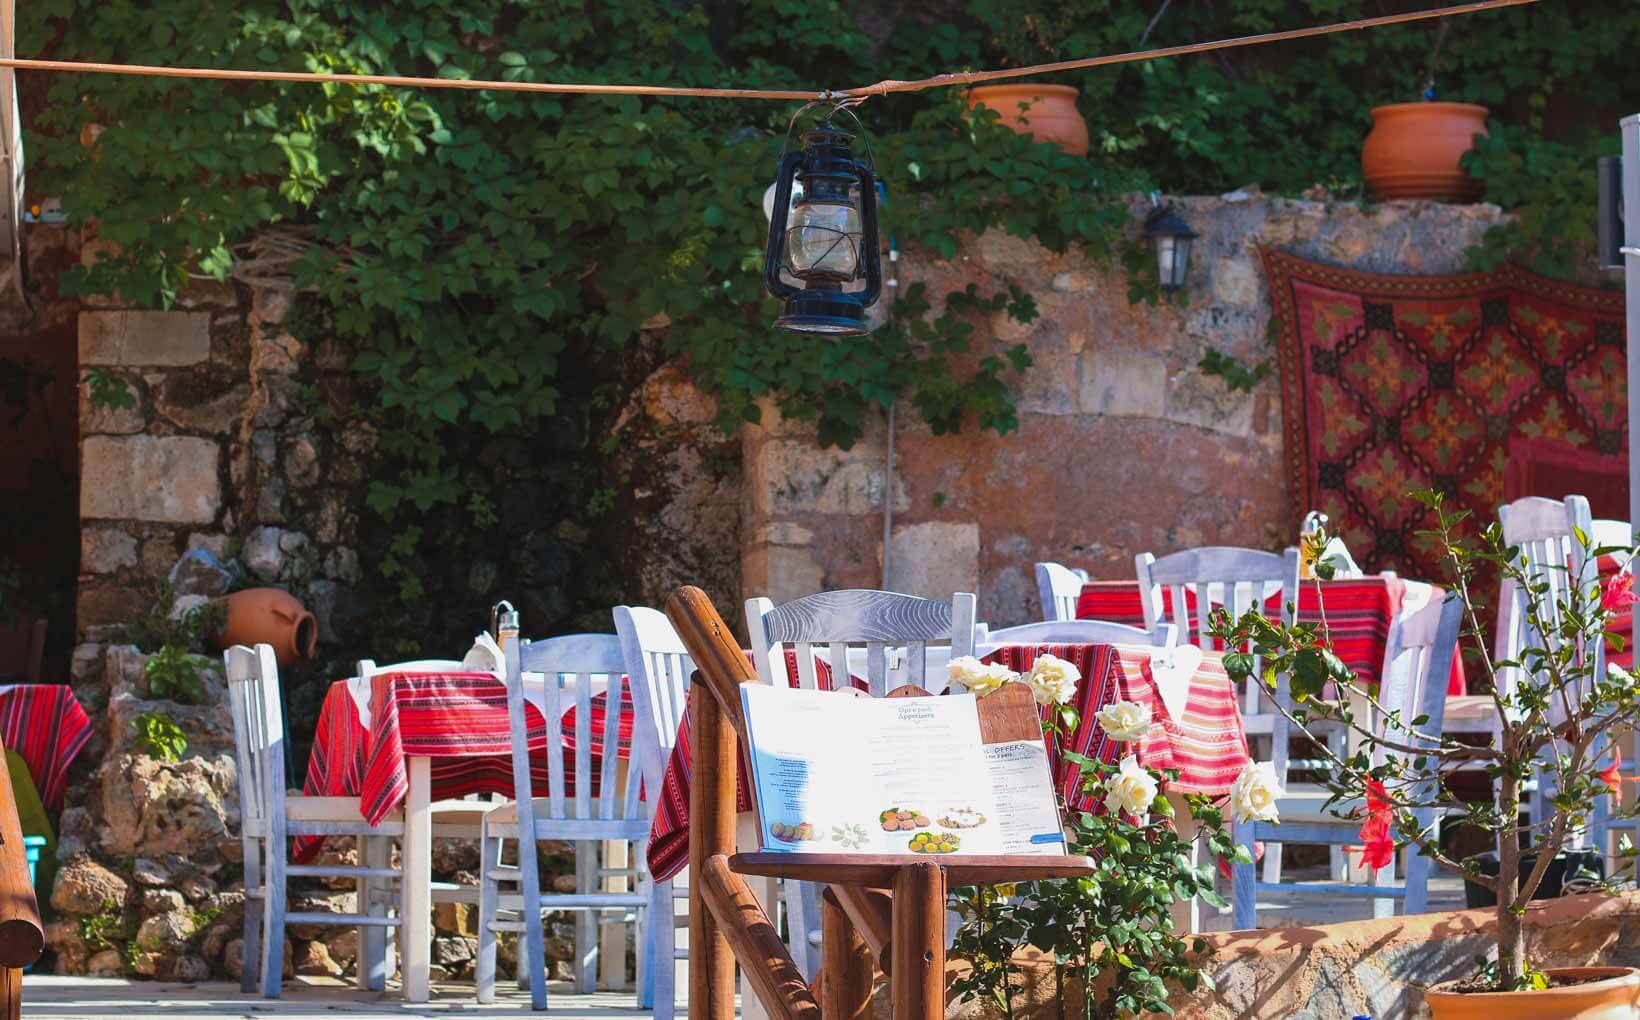 Krio Vrisali Restaurant in Chania view.5 Restaurants in Crete to visit on your Greek island vacation